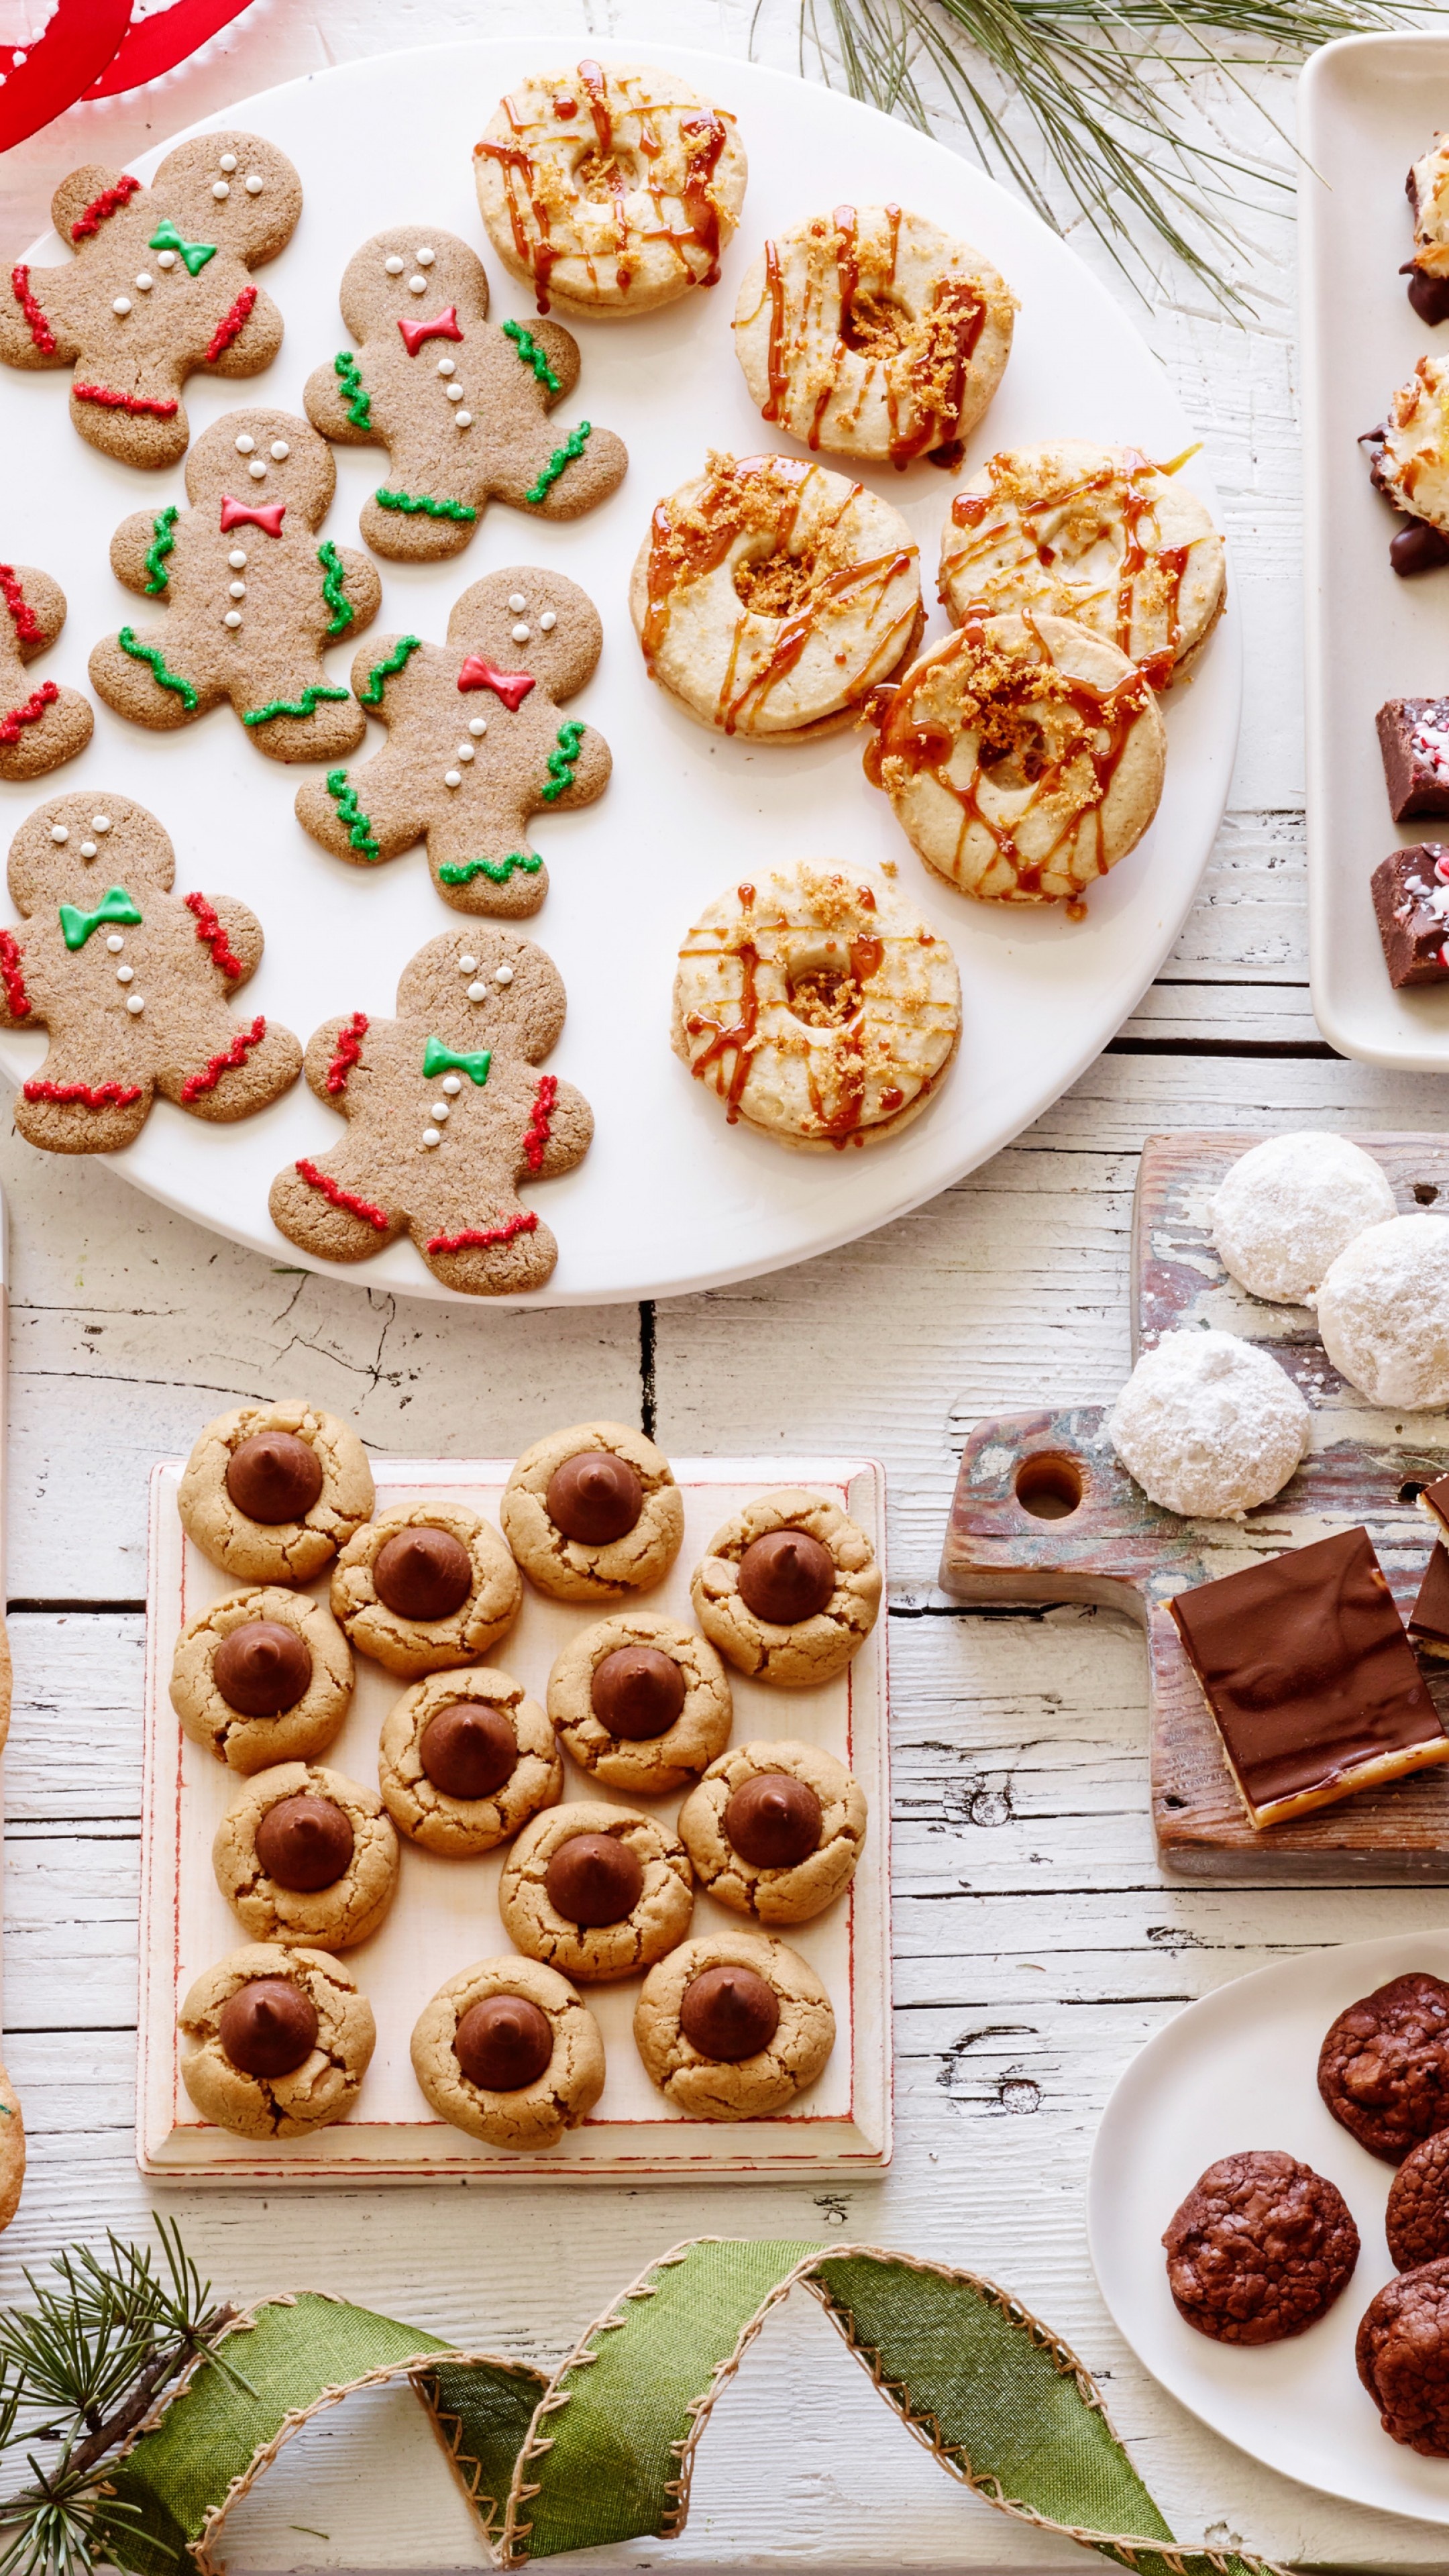 Gingerbread Man, Festive cookie plate, Holiday desserts, Sweet and savory, 2160x3840 4K Phone